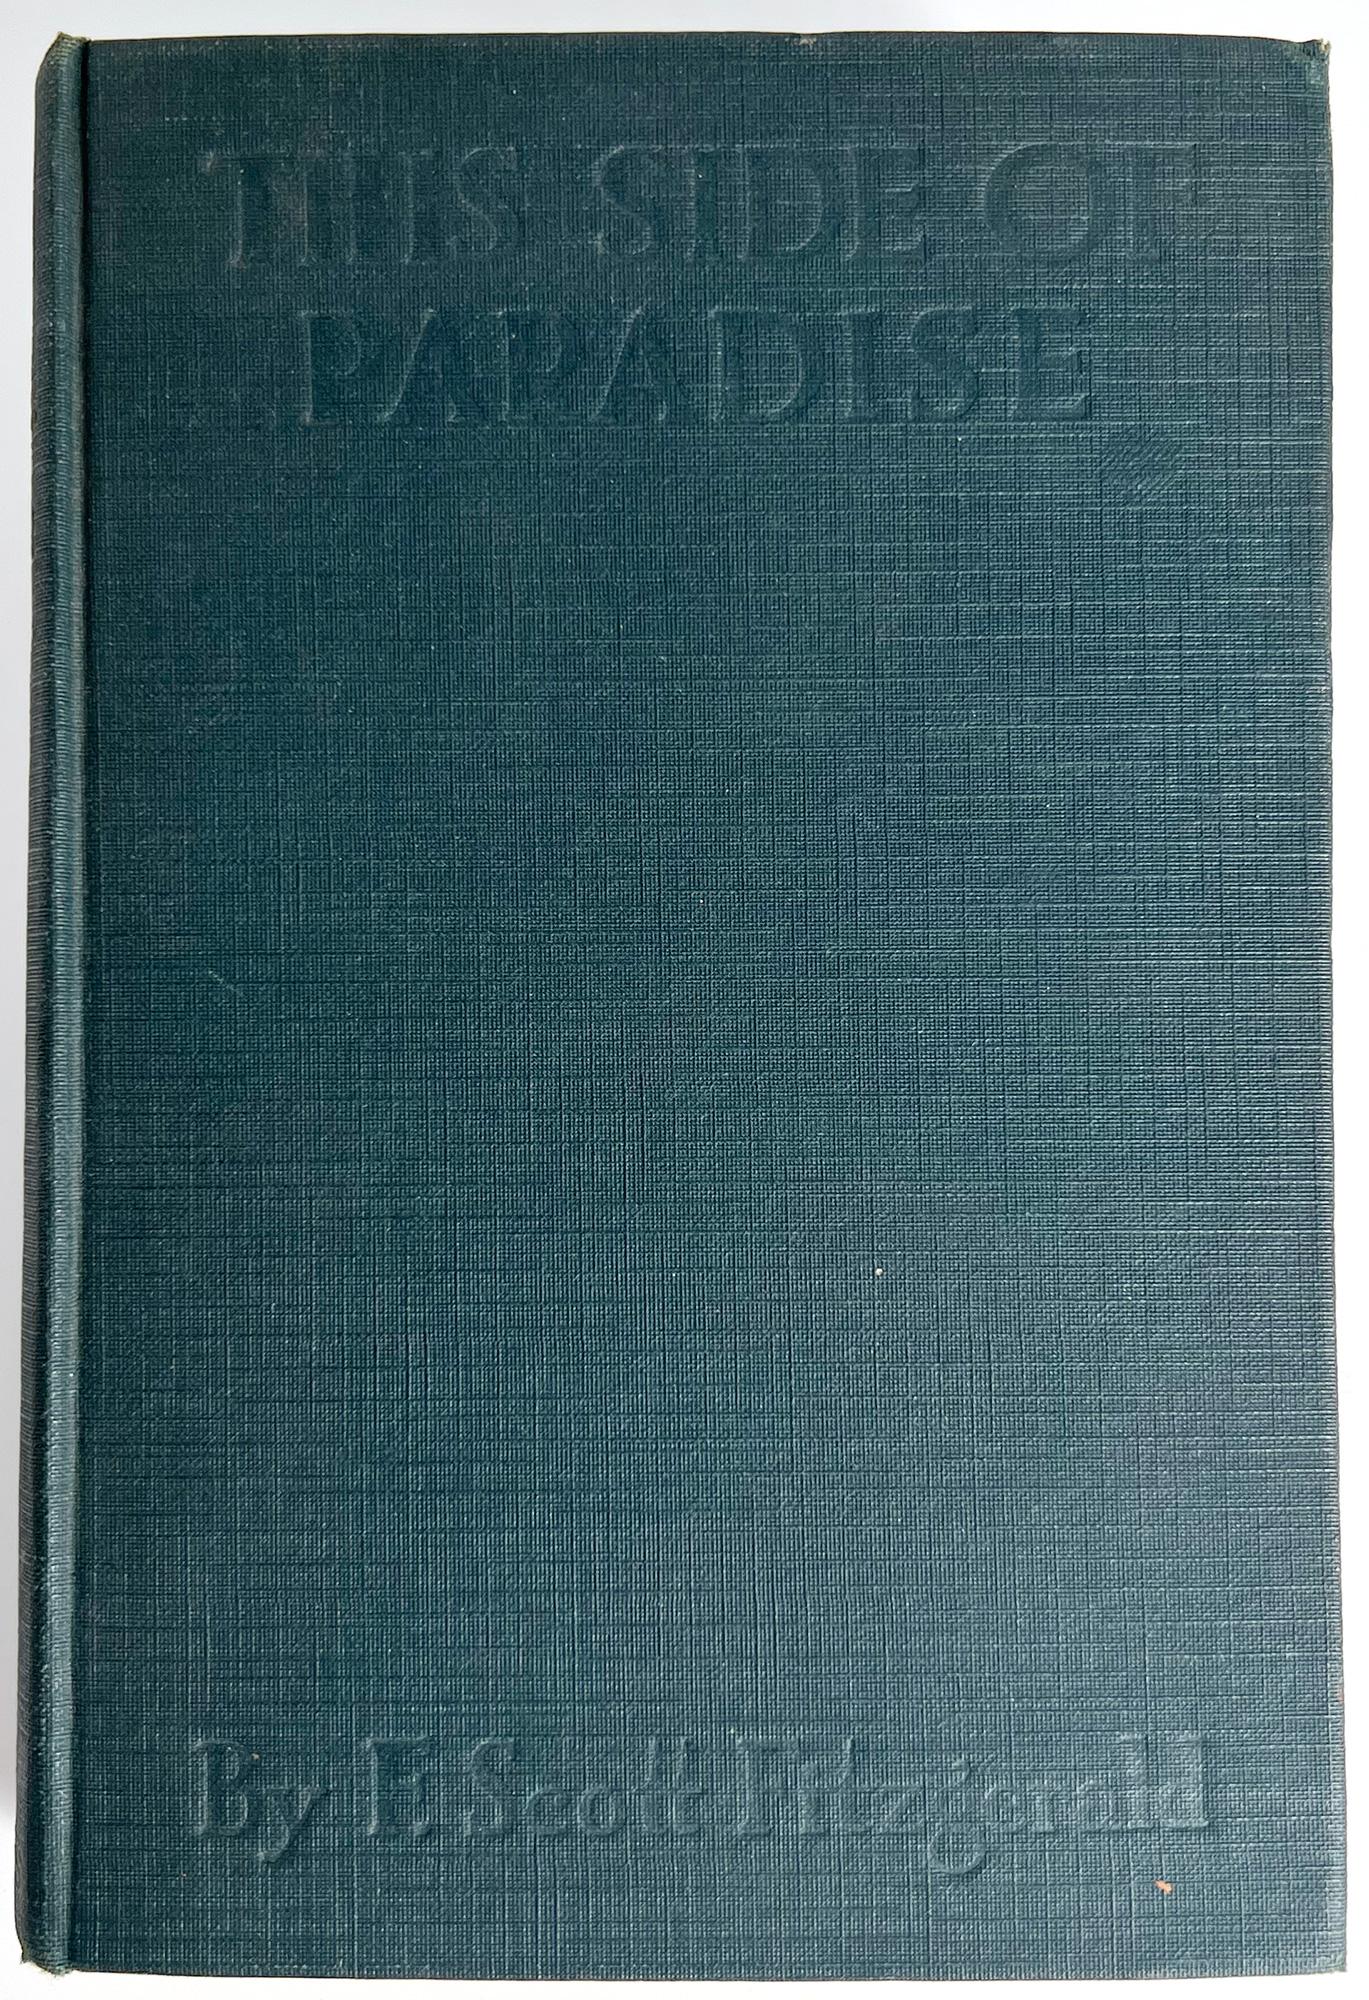 FIRST EDITION, FIRST PRINTING of Fitzgerald's DEBUT NOVEL

 New York: Charles Scribner's Sons, 1920.
8vo, 7 1/2 x 5 1/8 inches (190 x 130 mm); pp. vi, 305; printed in 11 pt Old Style type on wove paper. Dark blue cloth binding, title dry stamped on